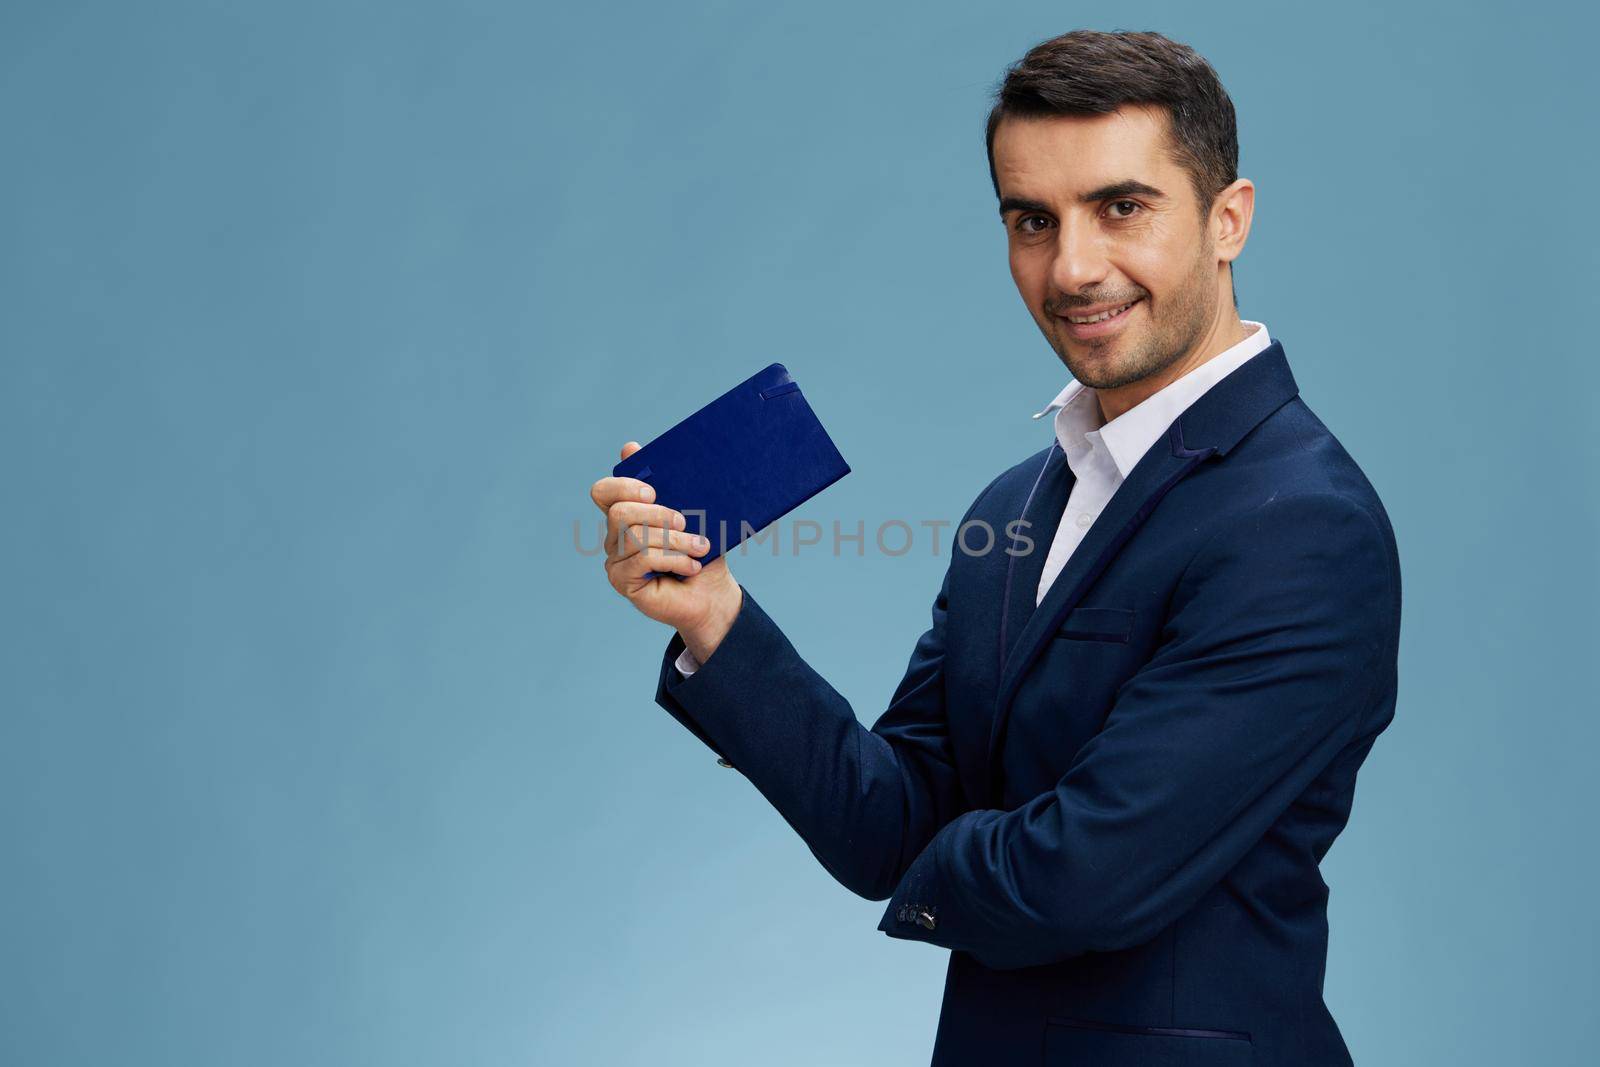 smiling man with notepad in hand in a stylish suit posing self-confidence blue background. High quality photo